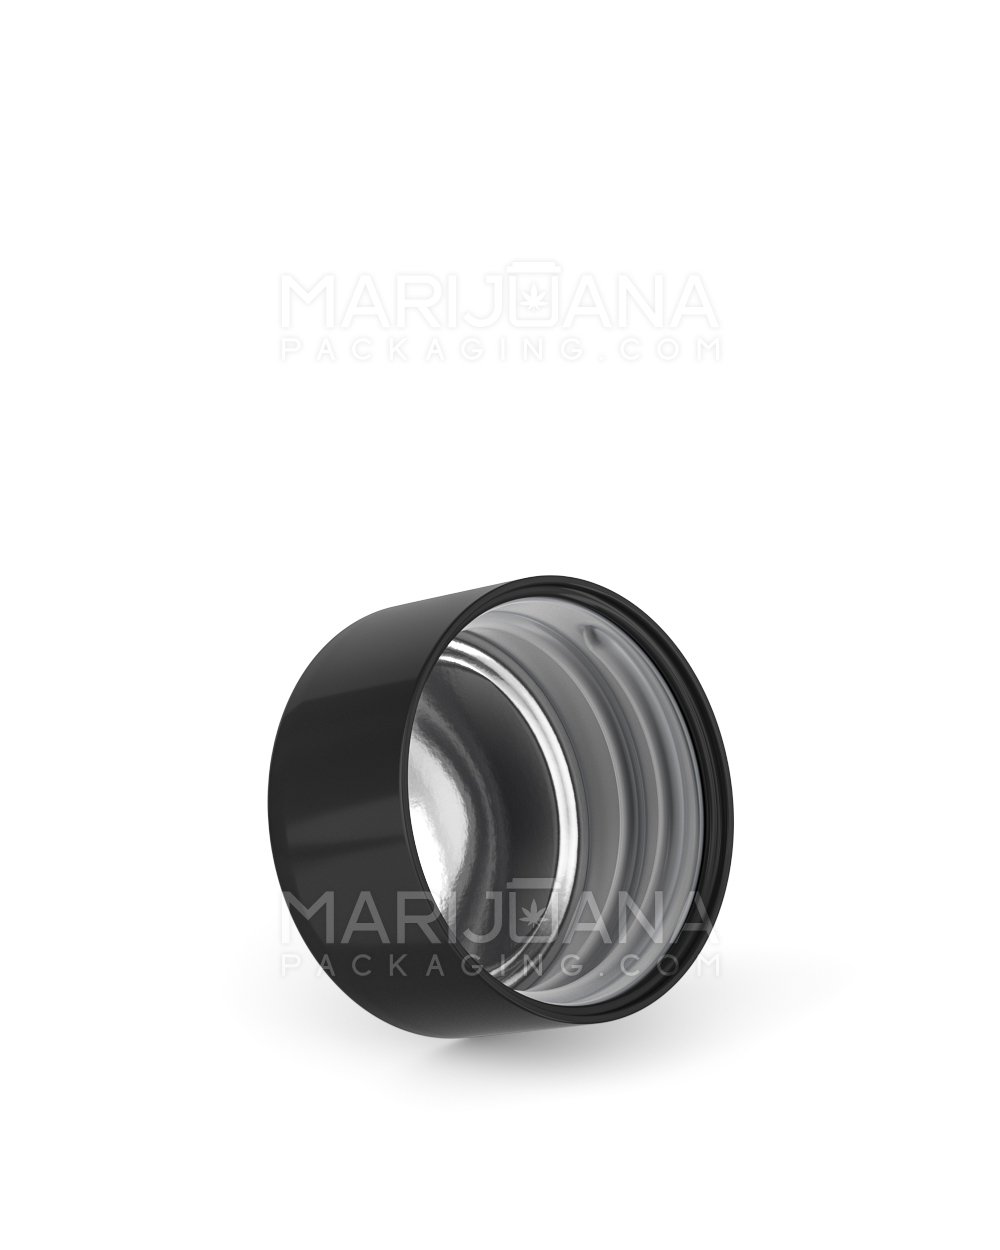 Child Resistant | Smooth Push Down & Turn Plastic Caps w/ Foil Liner | 28mm - Glossy Black - 504 Count - 2